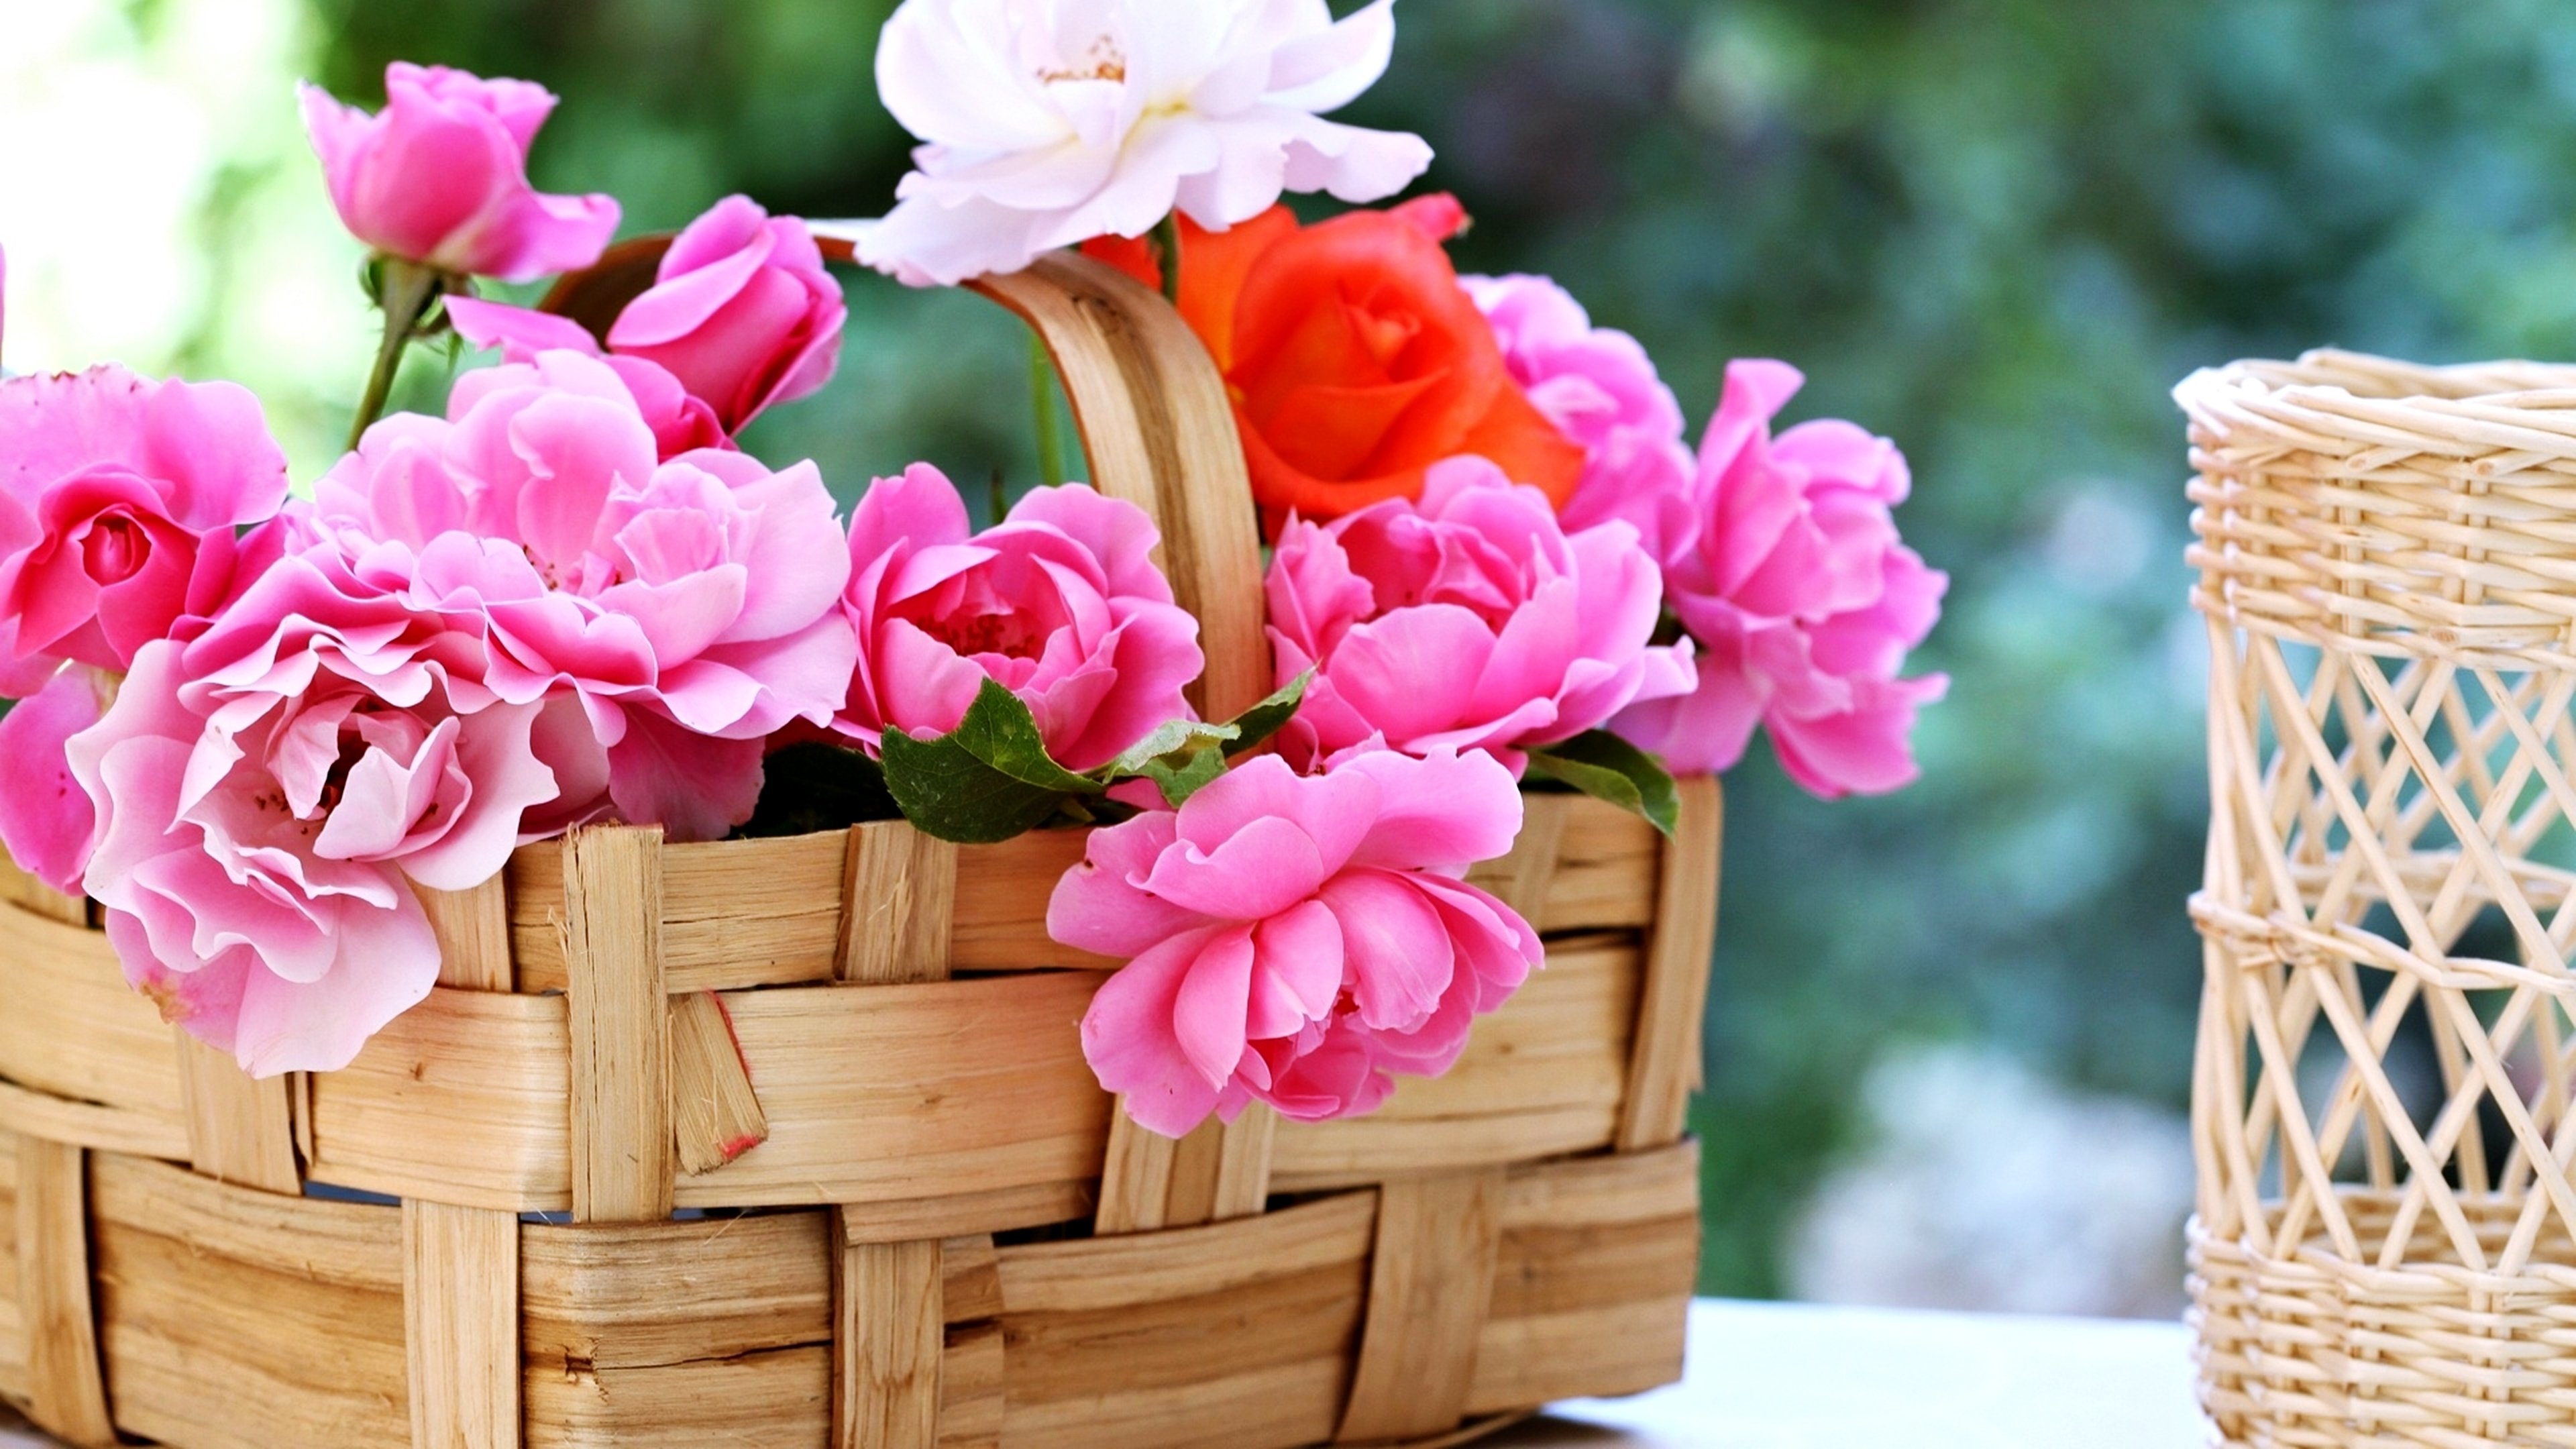 basket, Roses, Flowers, Gardens, Spring, Nature, Beauty, Love, Romance, Emotions, Life Wallpaper HD / Desktop and Mobile Background